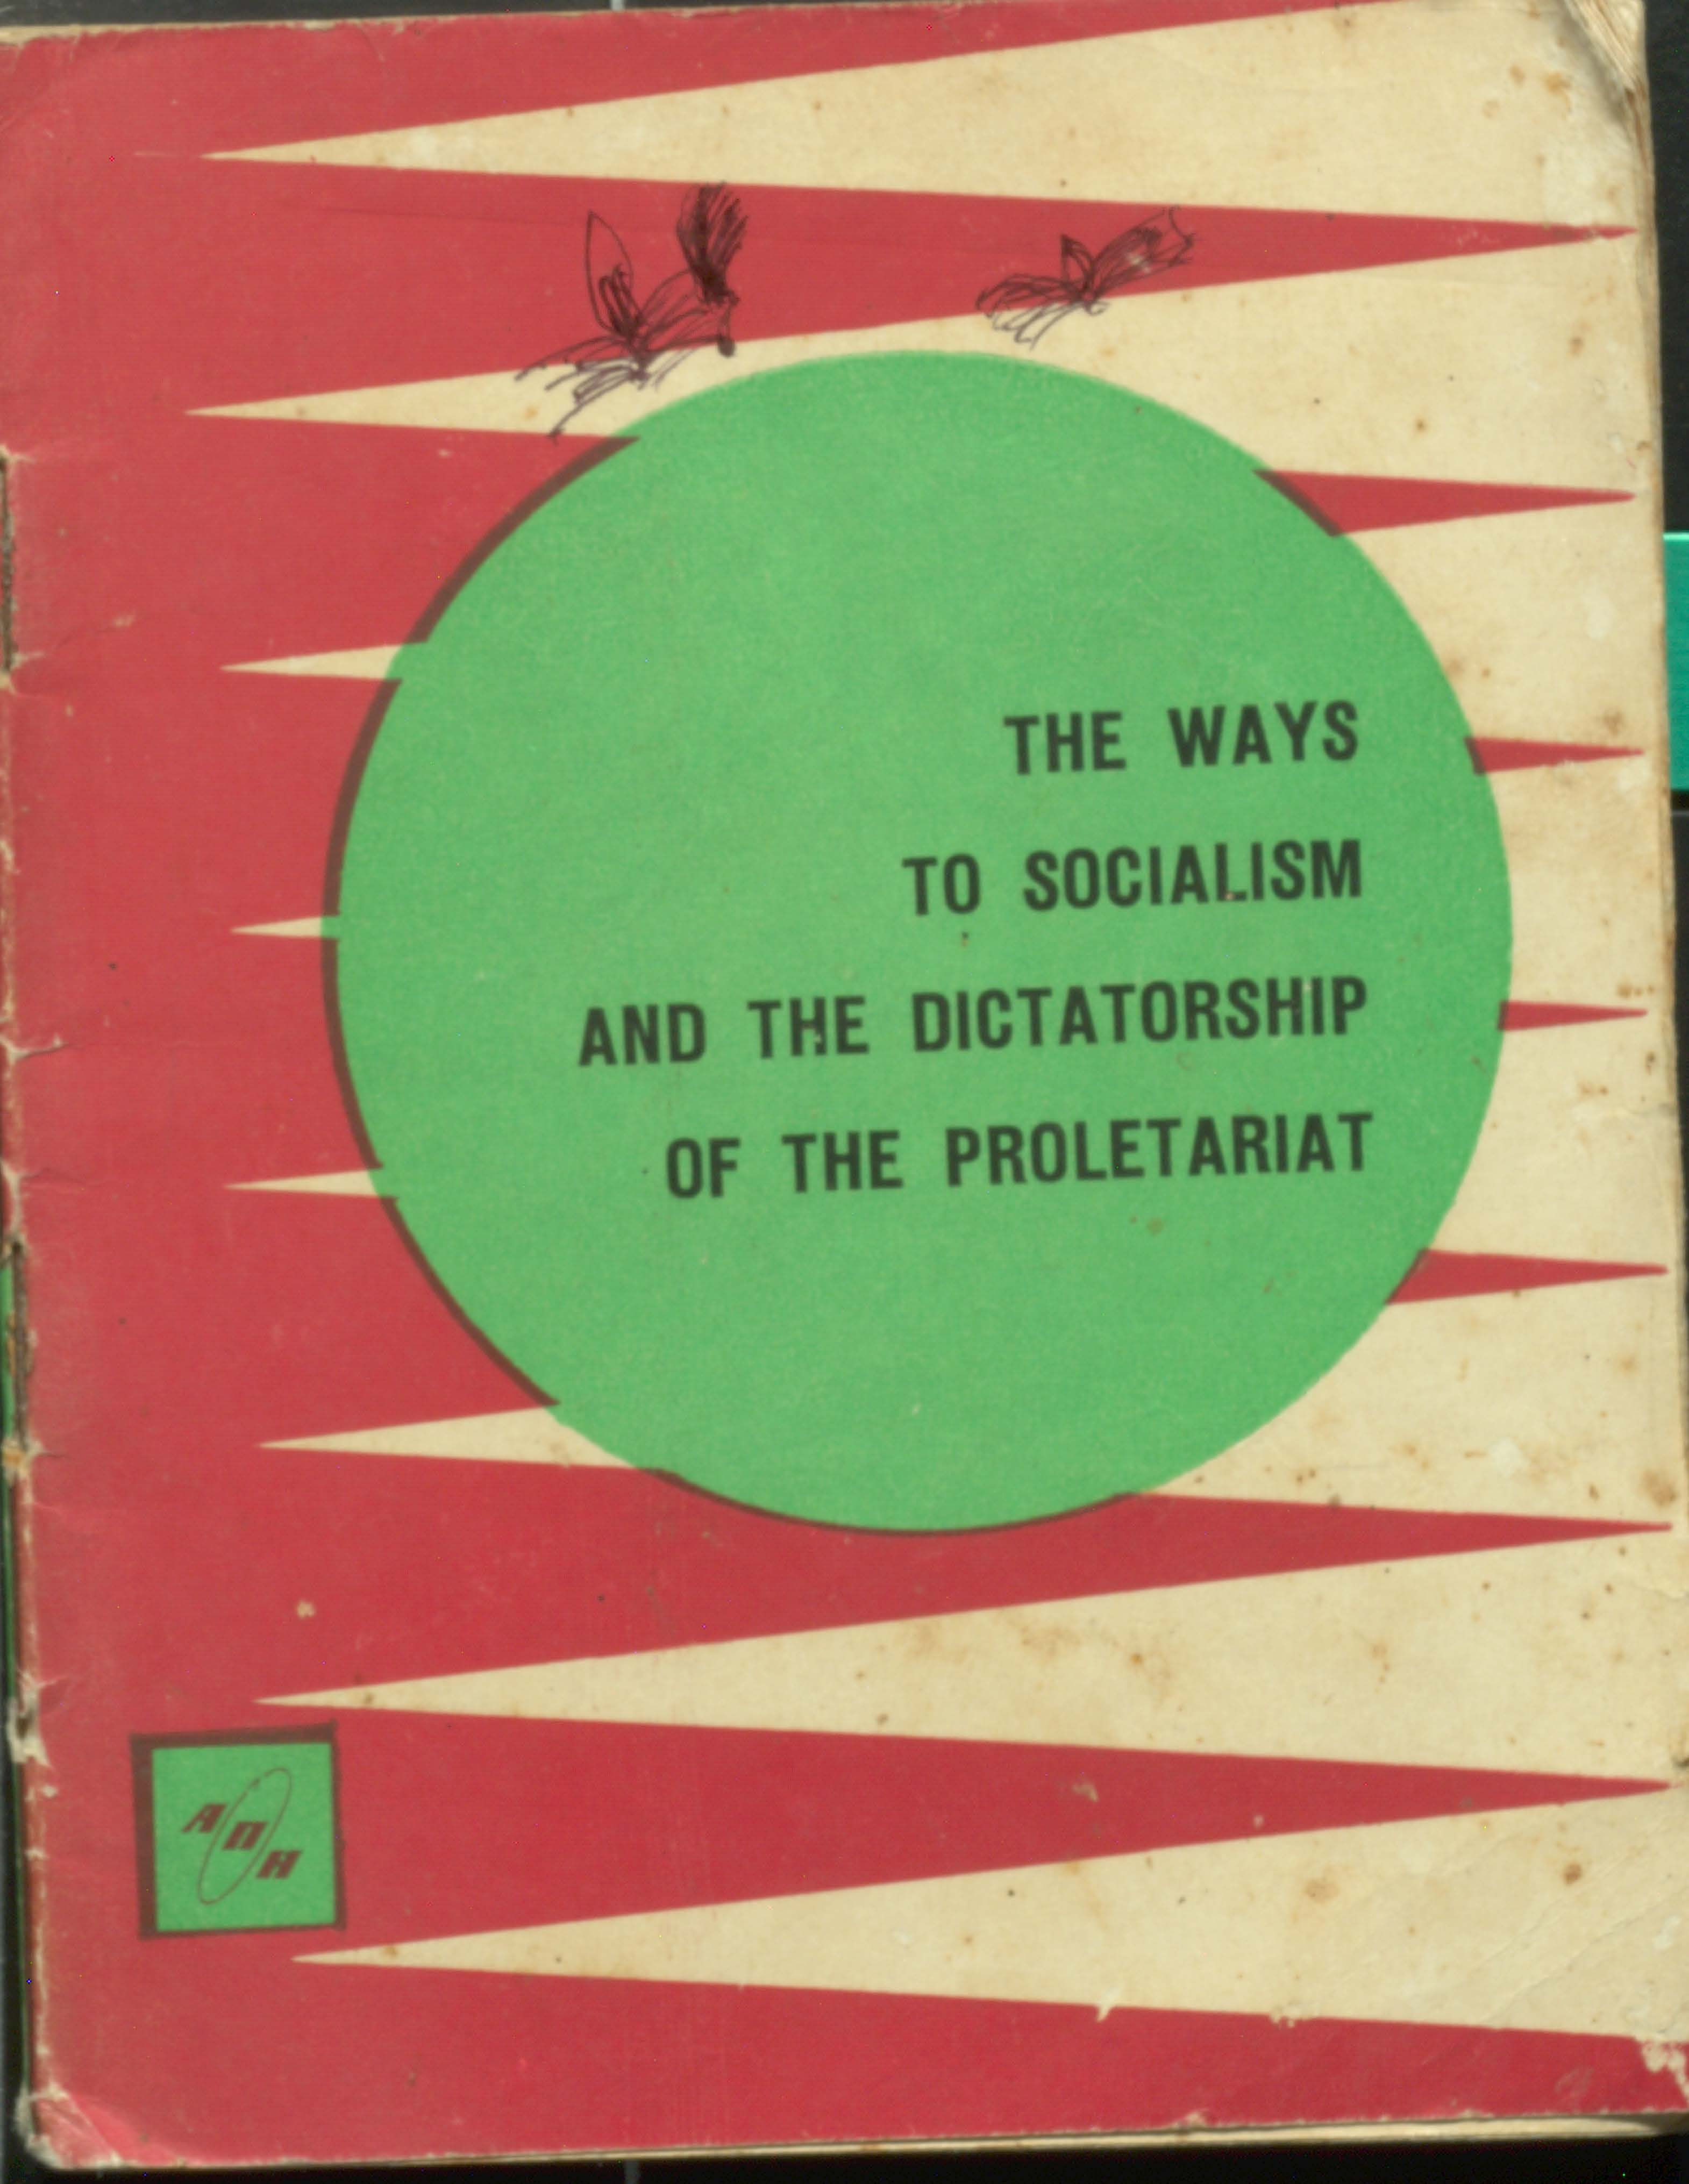 The Ways to Socialism and the Dictarship of the Proletariat